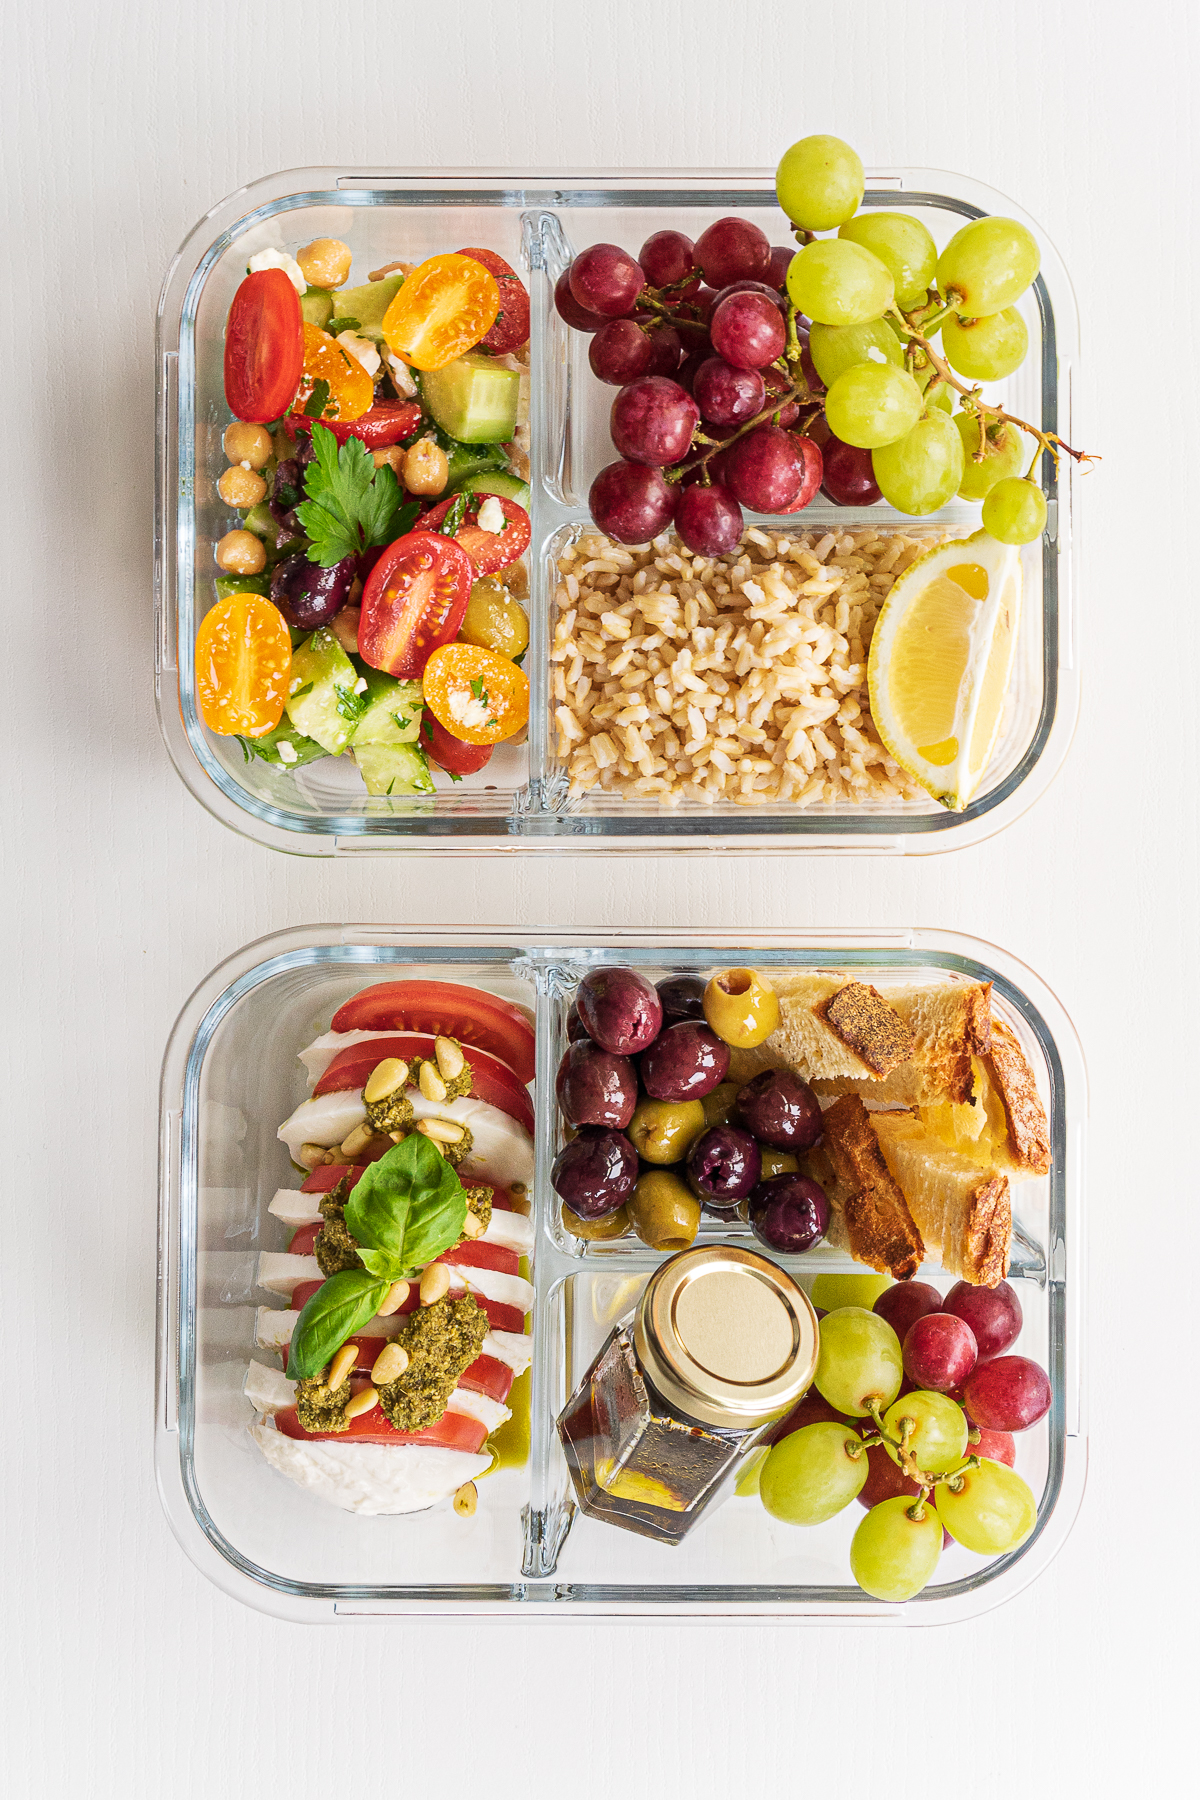 100+ Lunch Box Recipes and Ideas